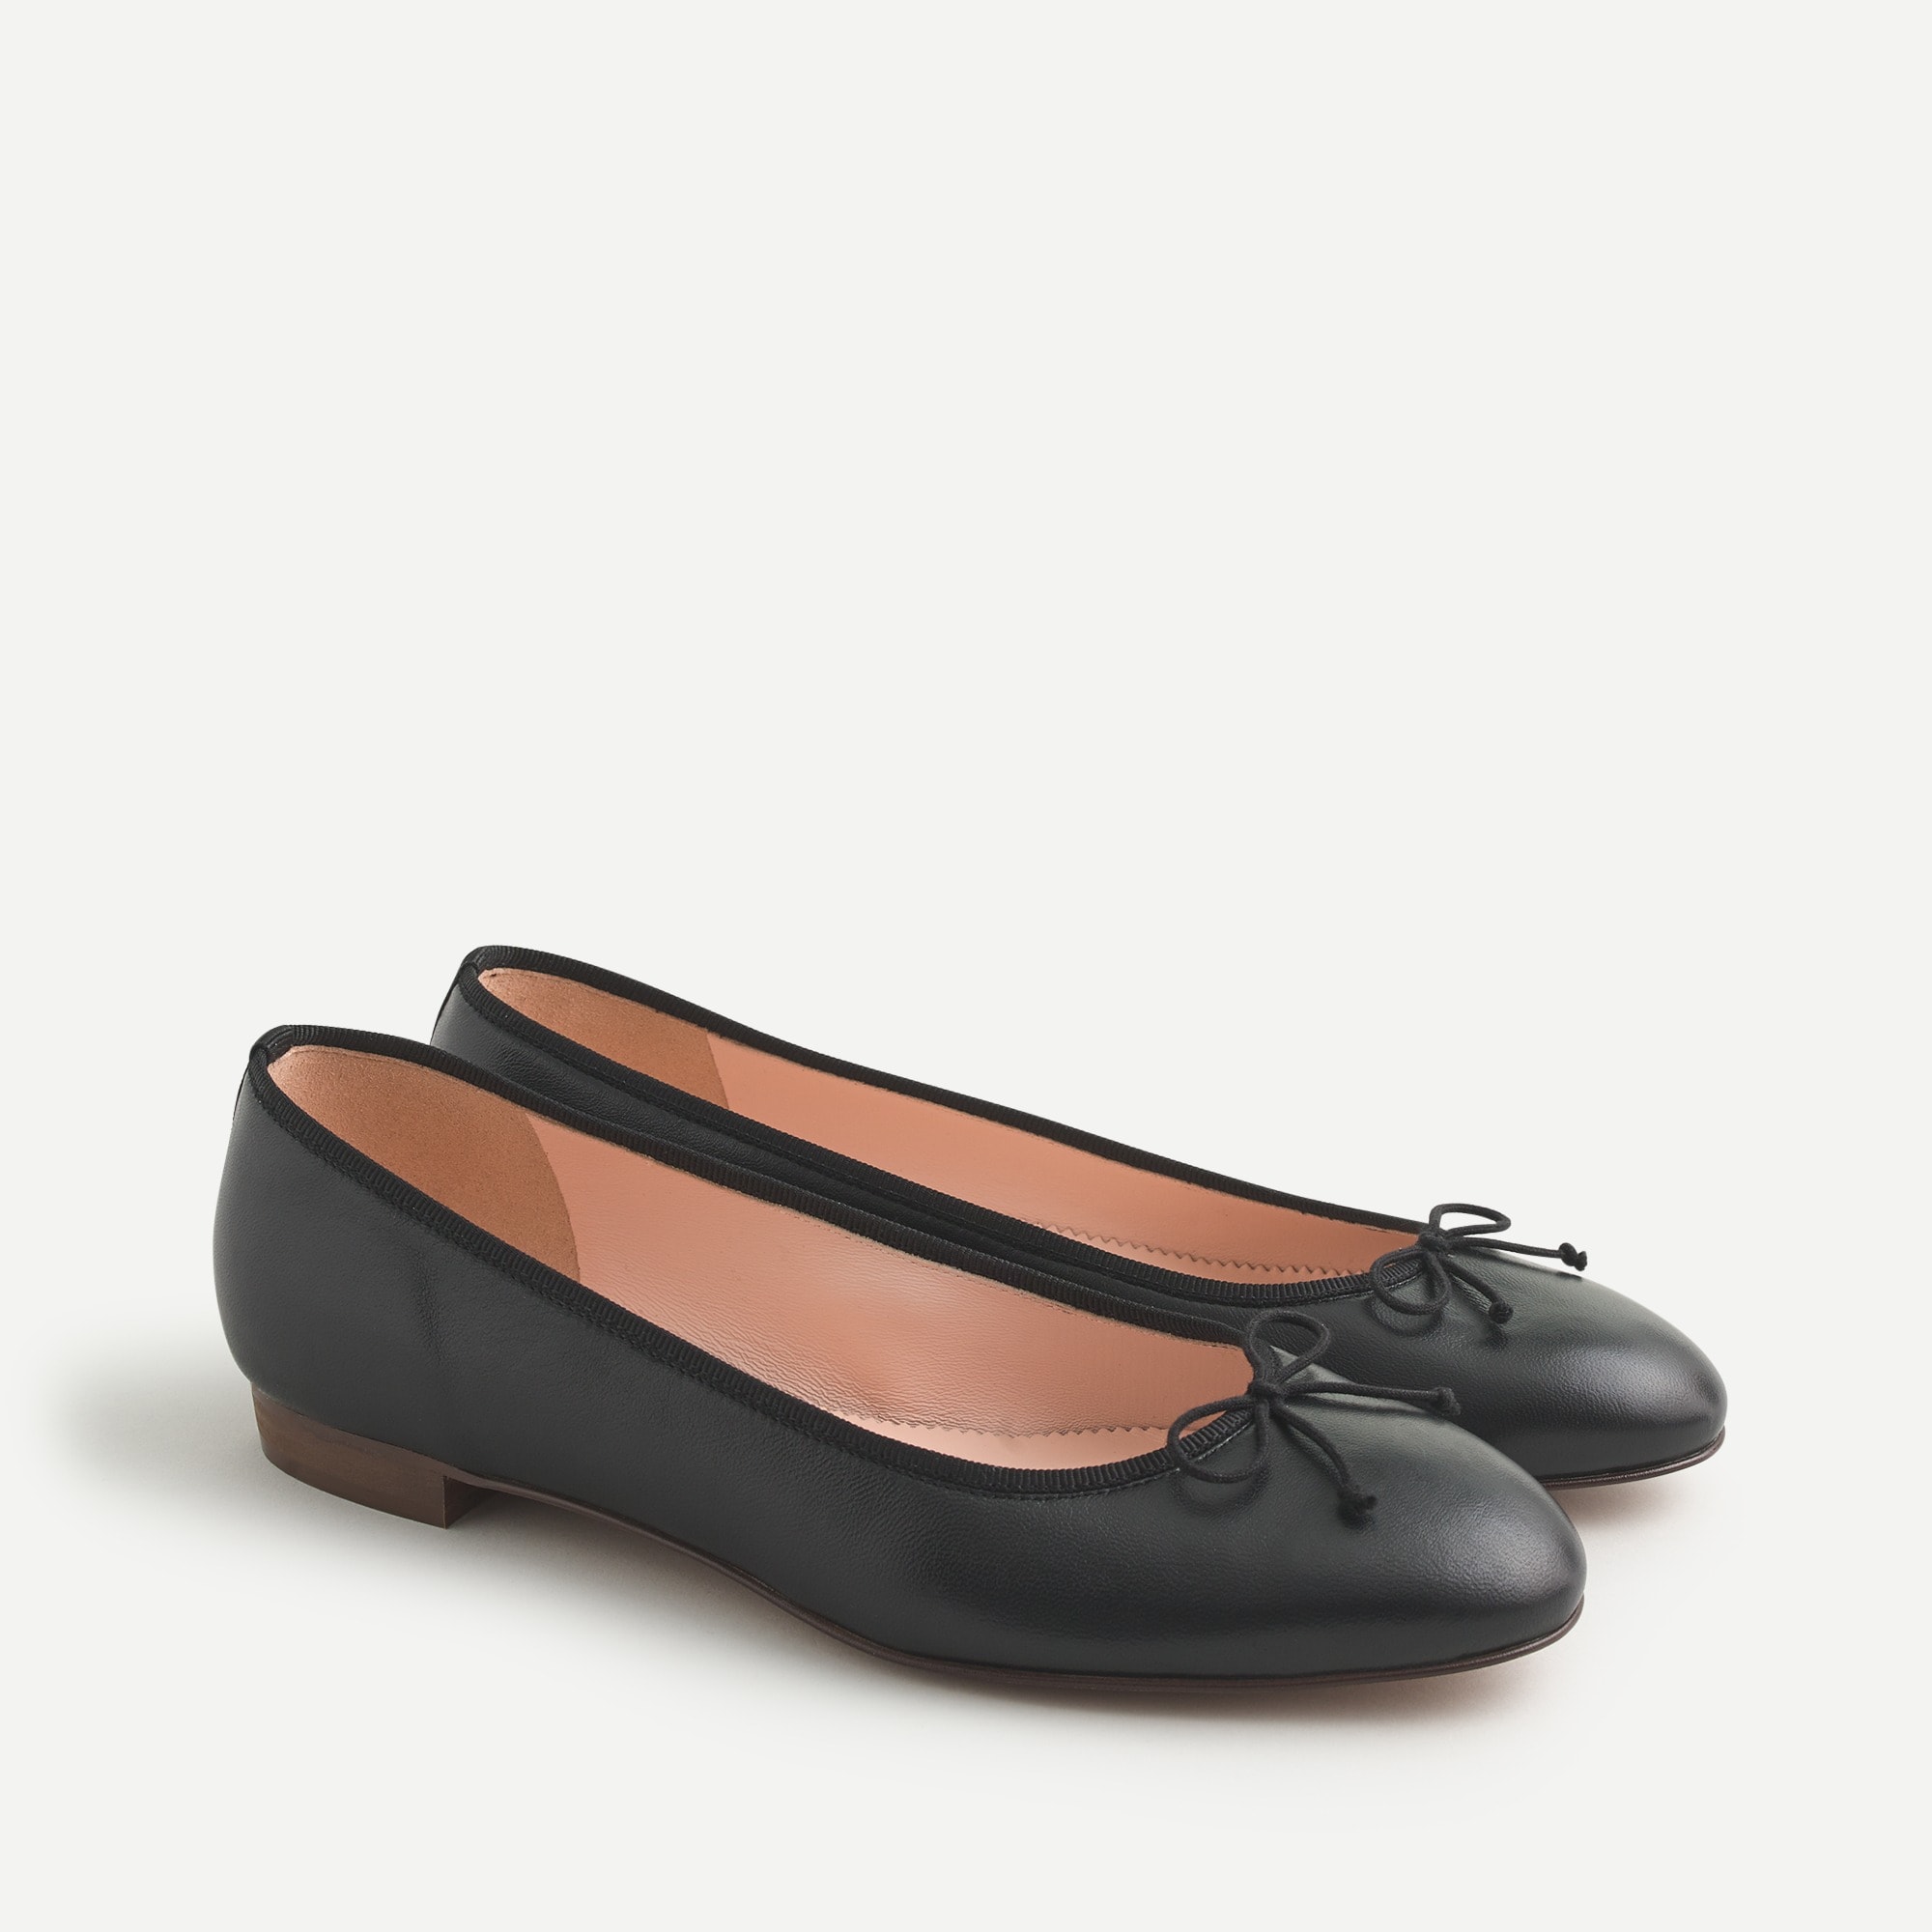 womens black flats with bow